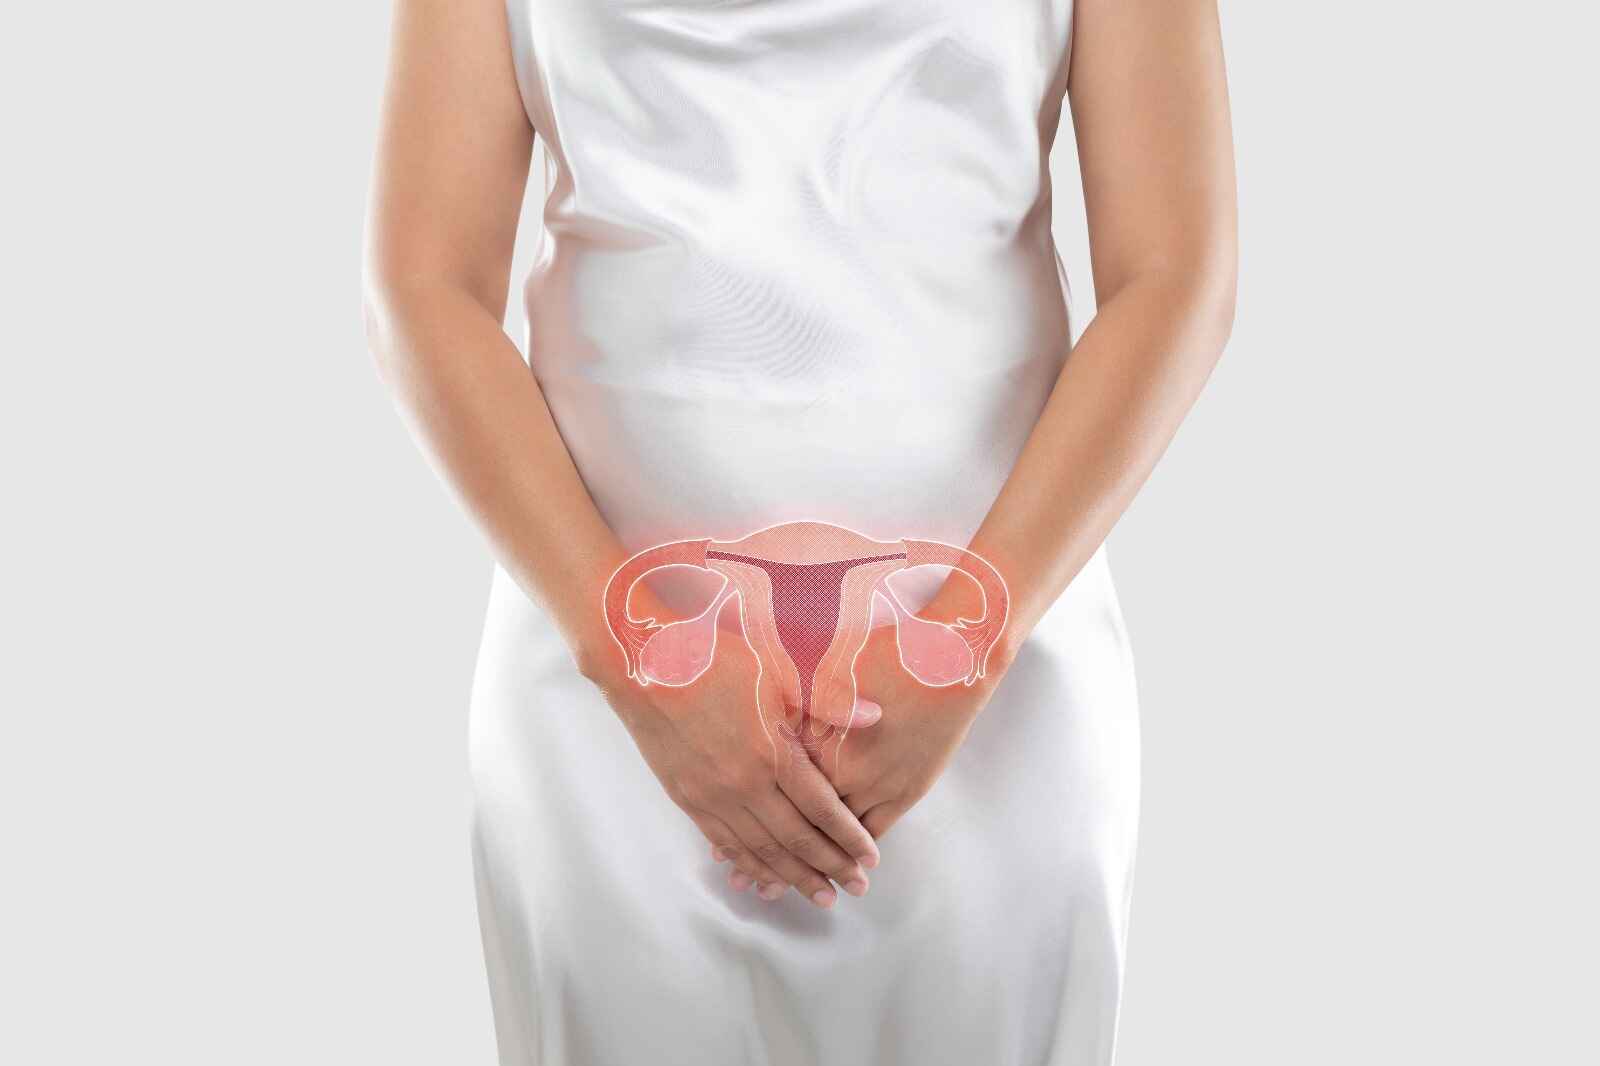 Symptoms of abnormal vaginal discharge include smelly discharge, unusual color, and yeast infection signs.